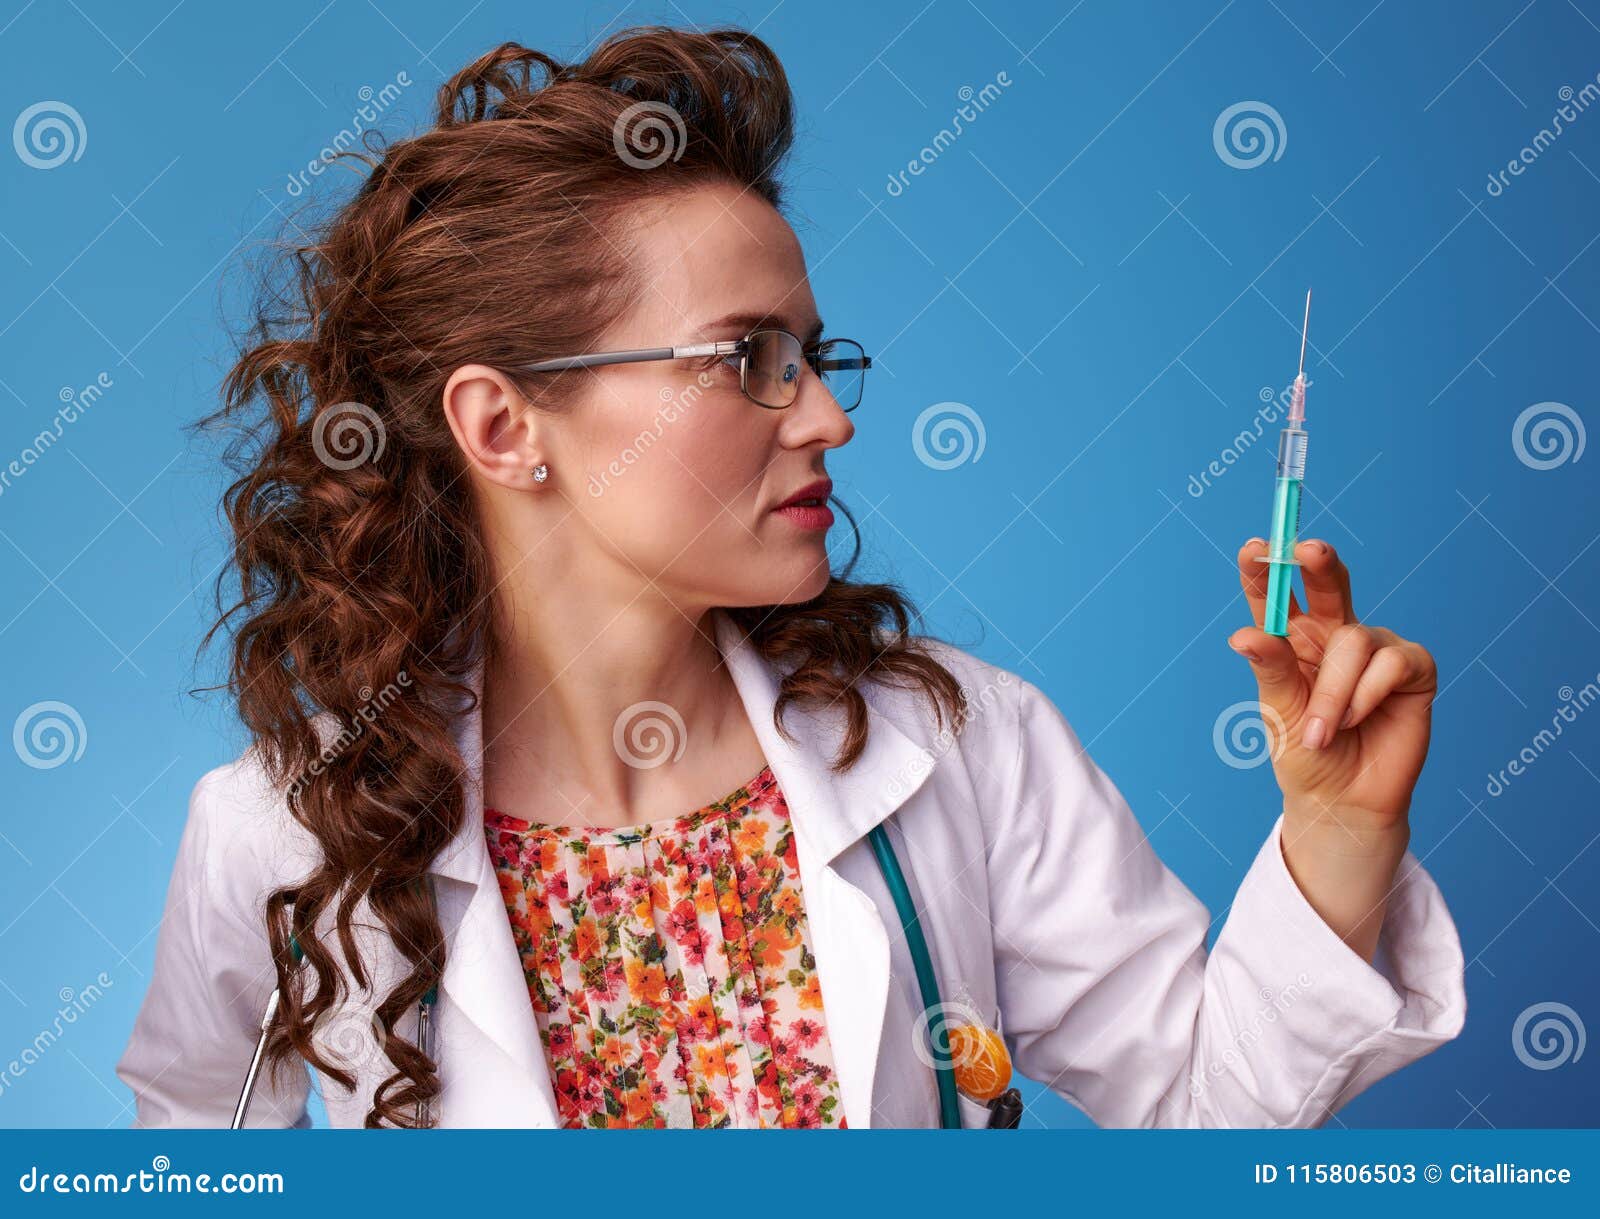 paediatrician woman looking at syringe on blue